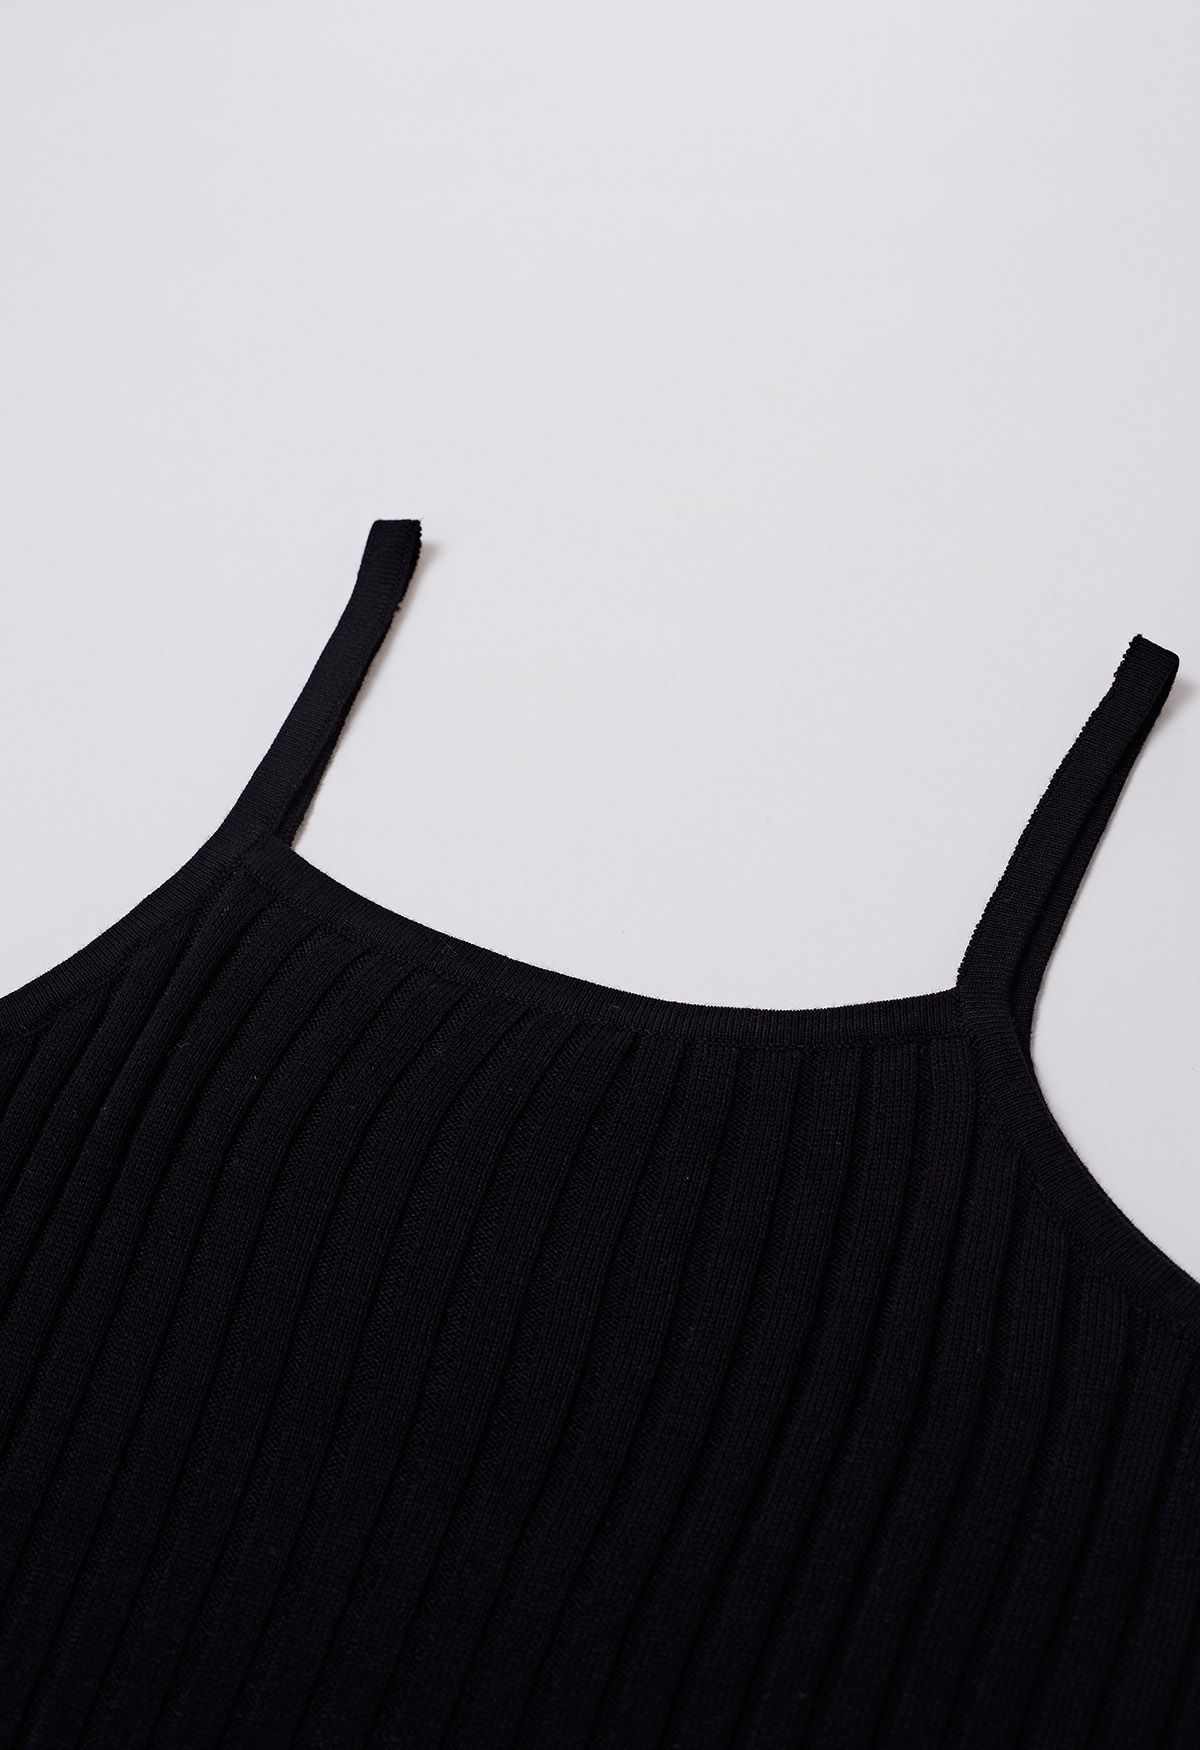 Solid Ribbed Knit Twinset Top in Black